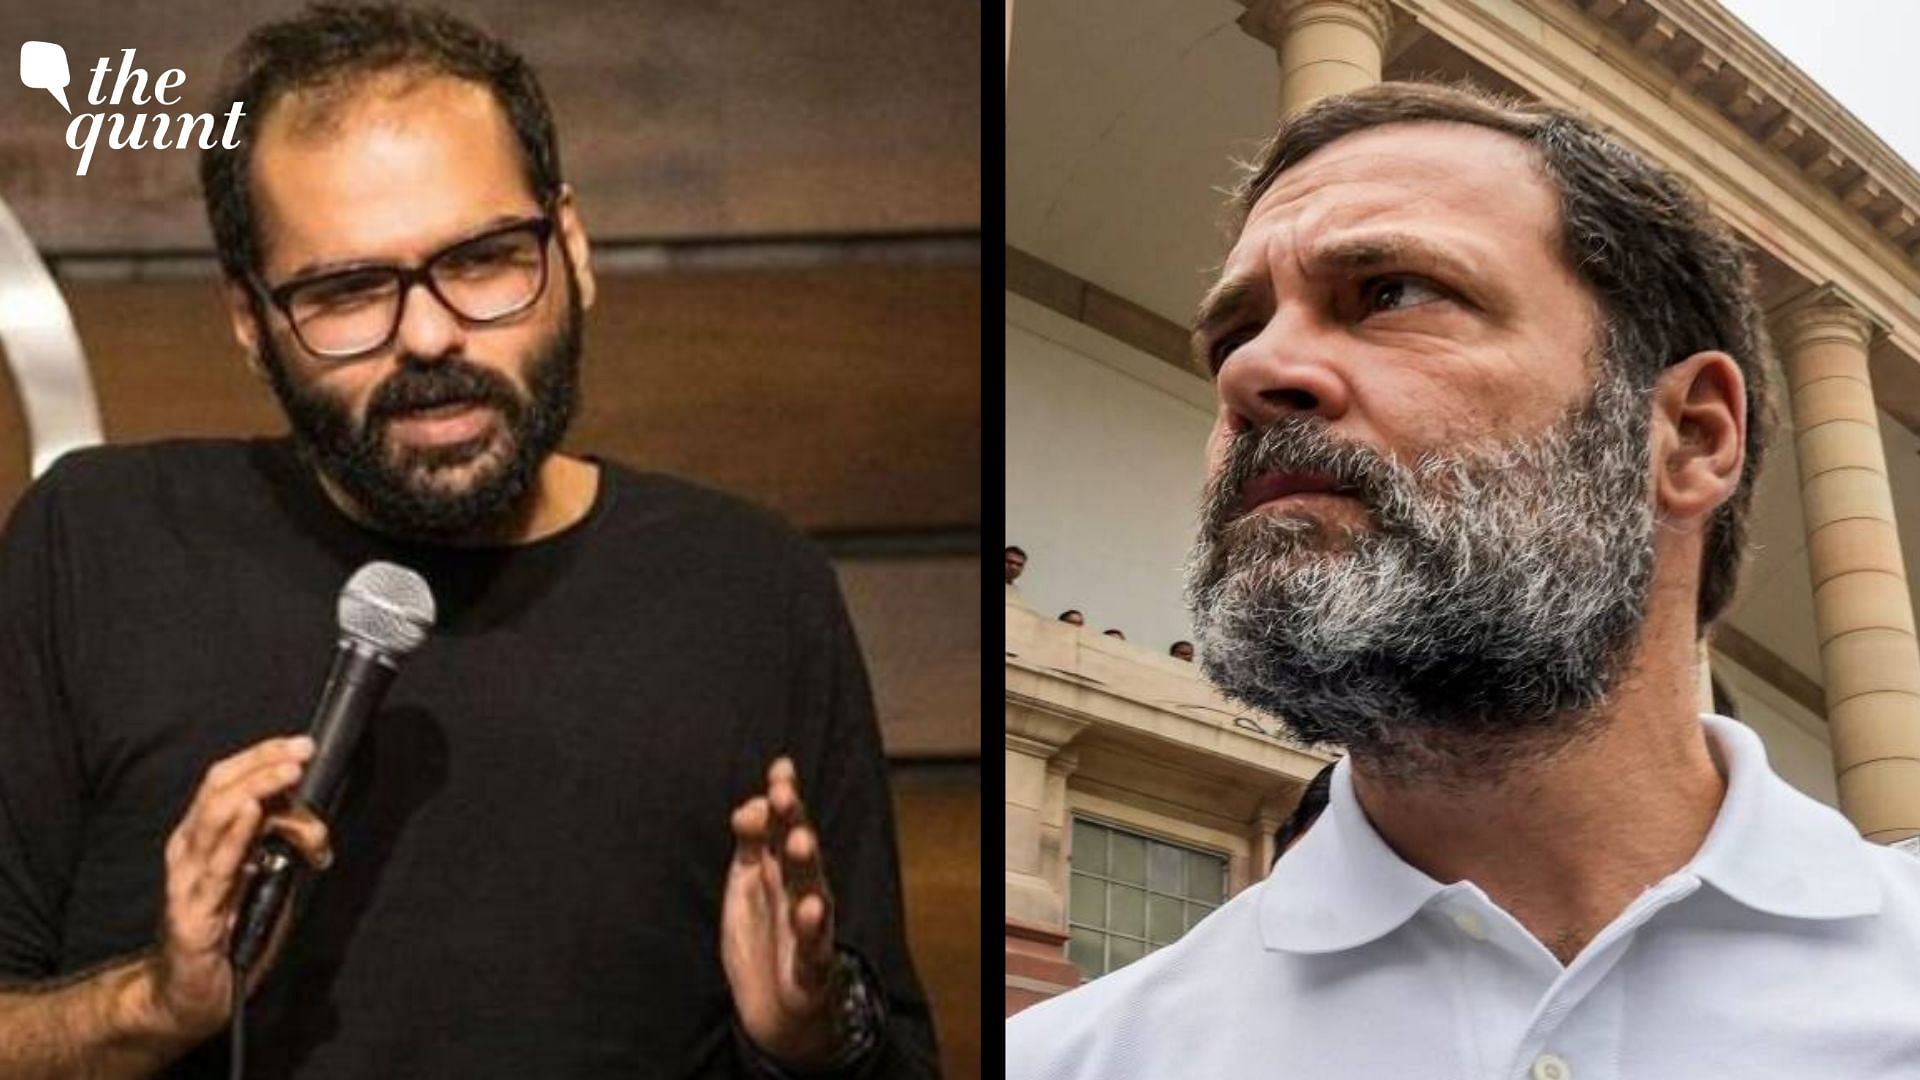 <div class="paragraphs"><p>From the Bombay High Court noting the absence of "necessary guard rails" in the new amendment to IT Rules as it heard comedian Kunal Kamra's plea, to the Patna High Court staying proceedings against Congress leader <a href="https://www.thequint.com/news/law/rahul-gandhi-modi-surname-defamation-case-did-sessions-court-miss-an-opportunity-of-righting-a-wrong">Rahul Gandhi,</a> here are the highlights from our courts on Monday, 24 April.</p></div>